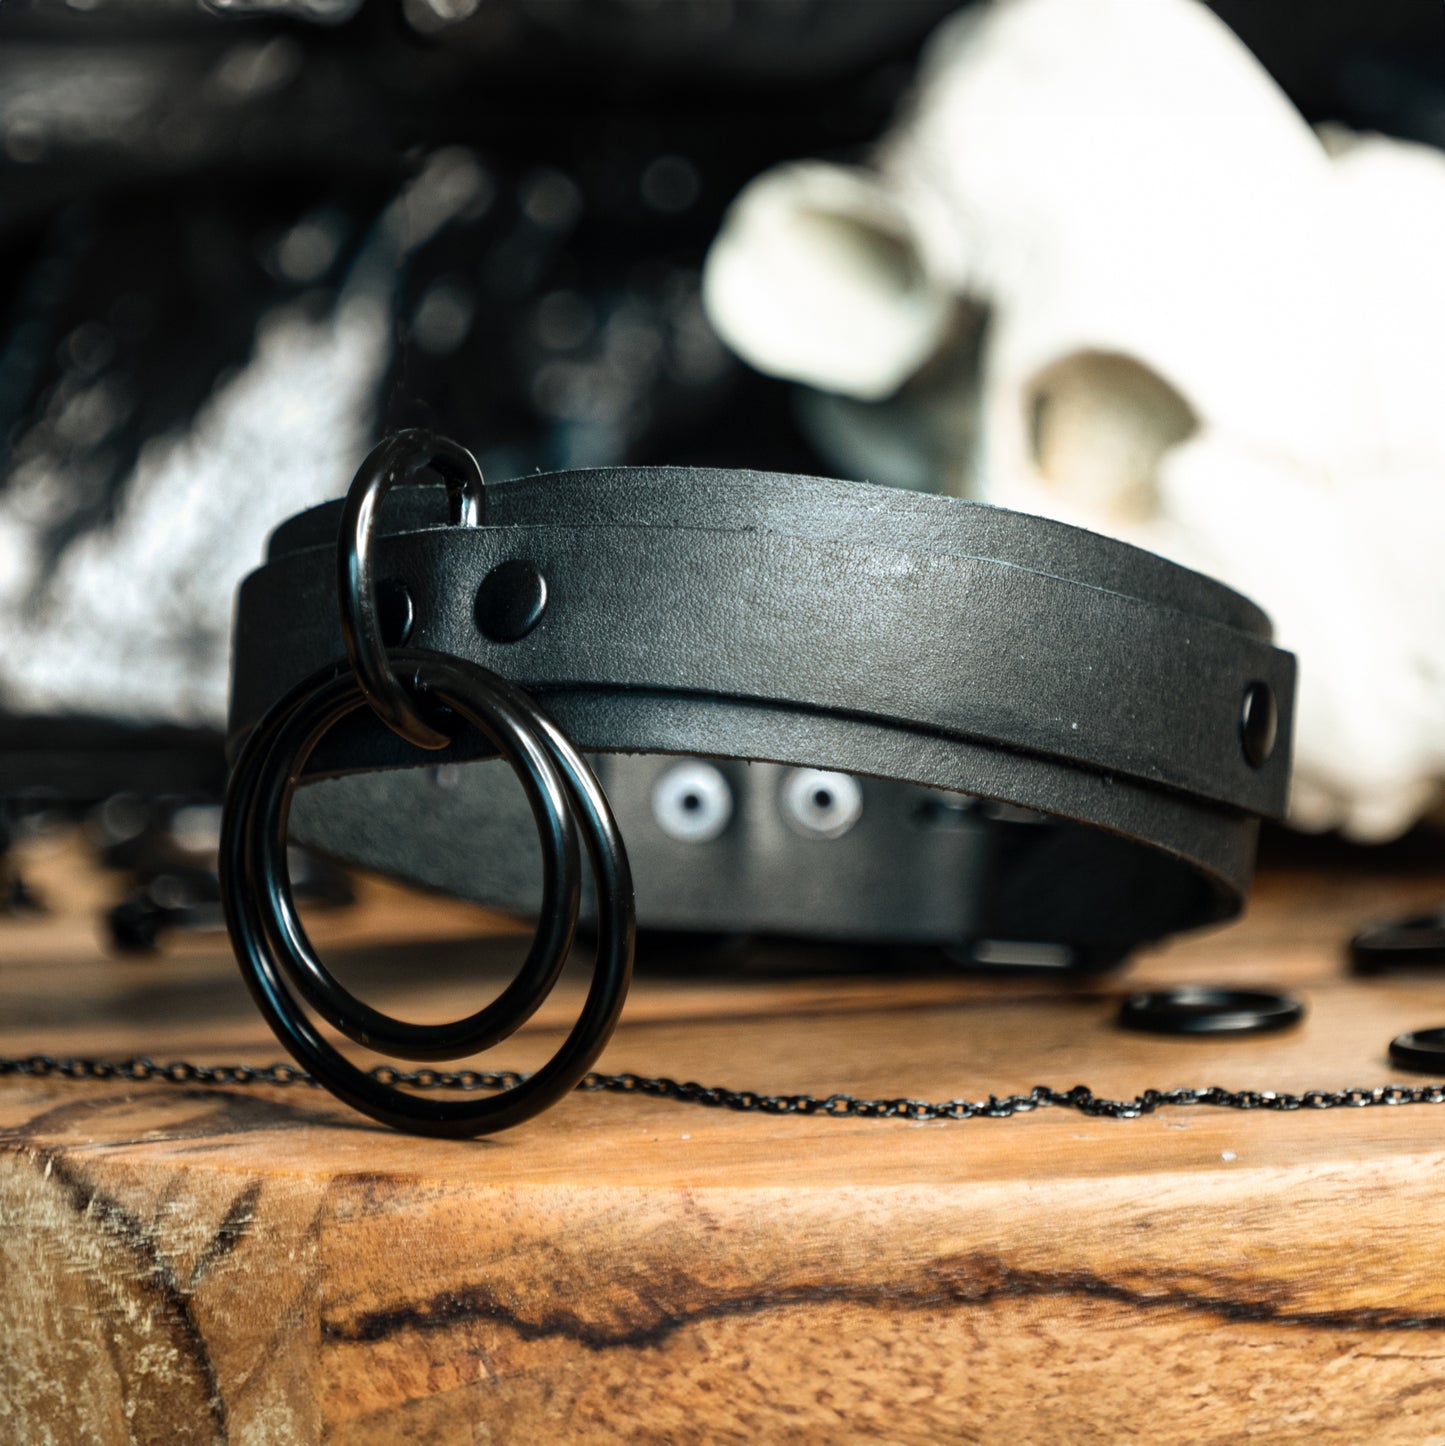 Real Leather Double O-Ring Collar Choker in All Black - Edgy, Gothic and Unique Accessory